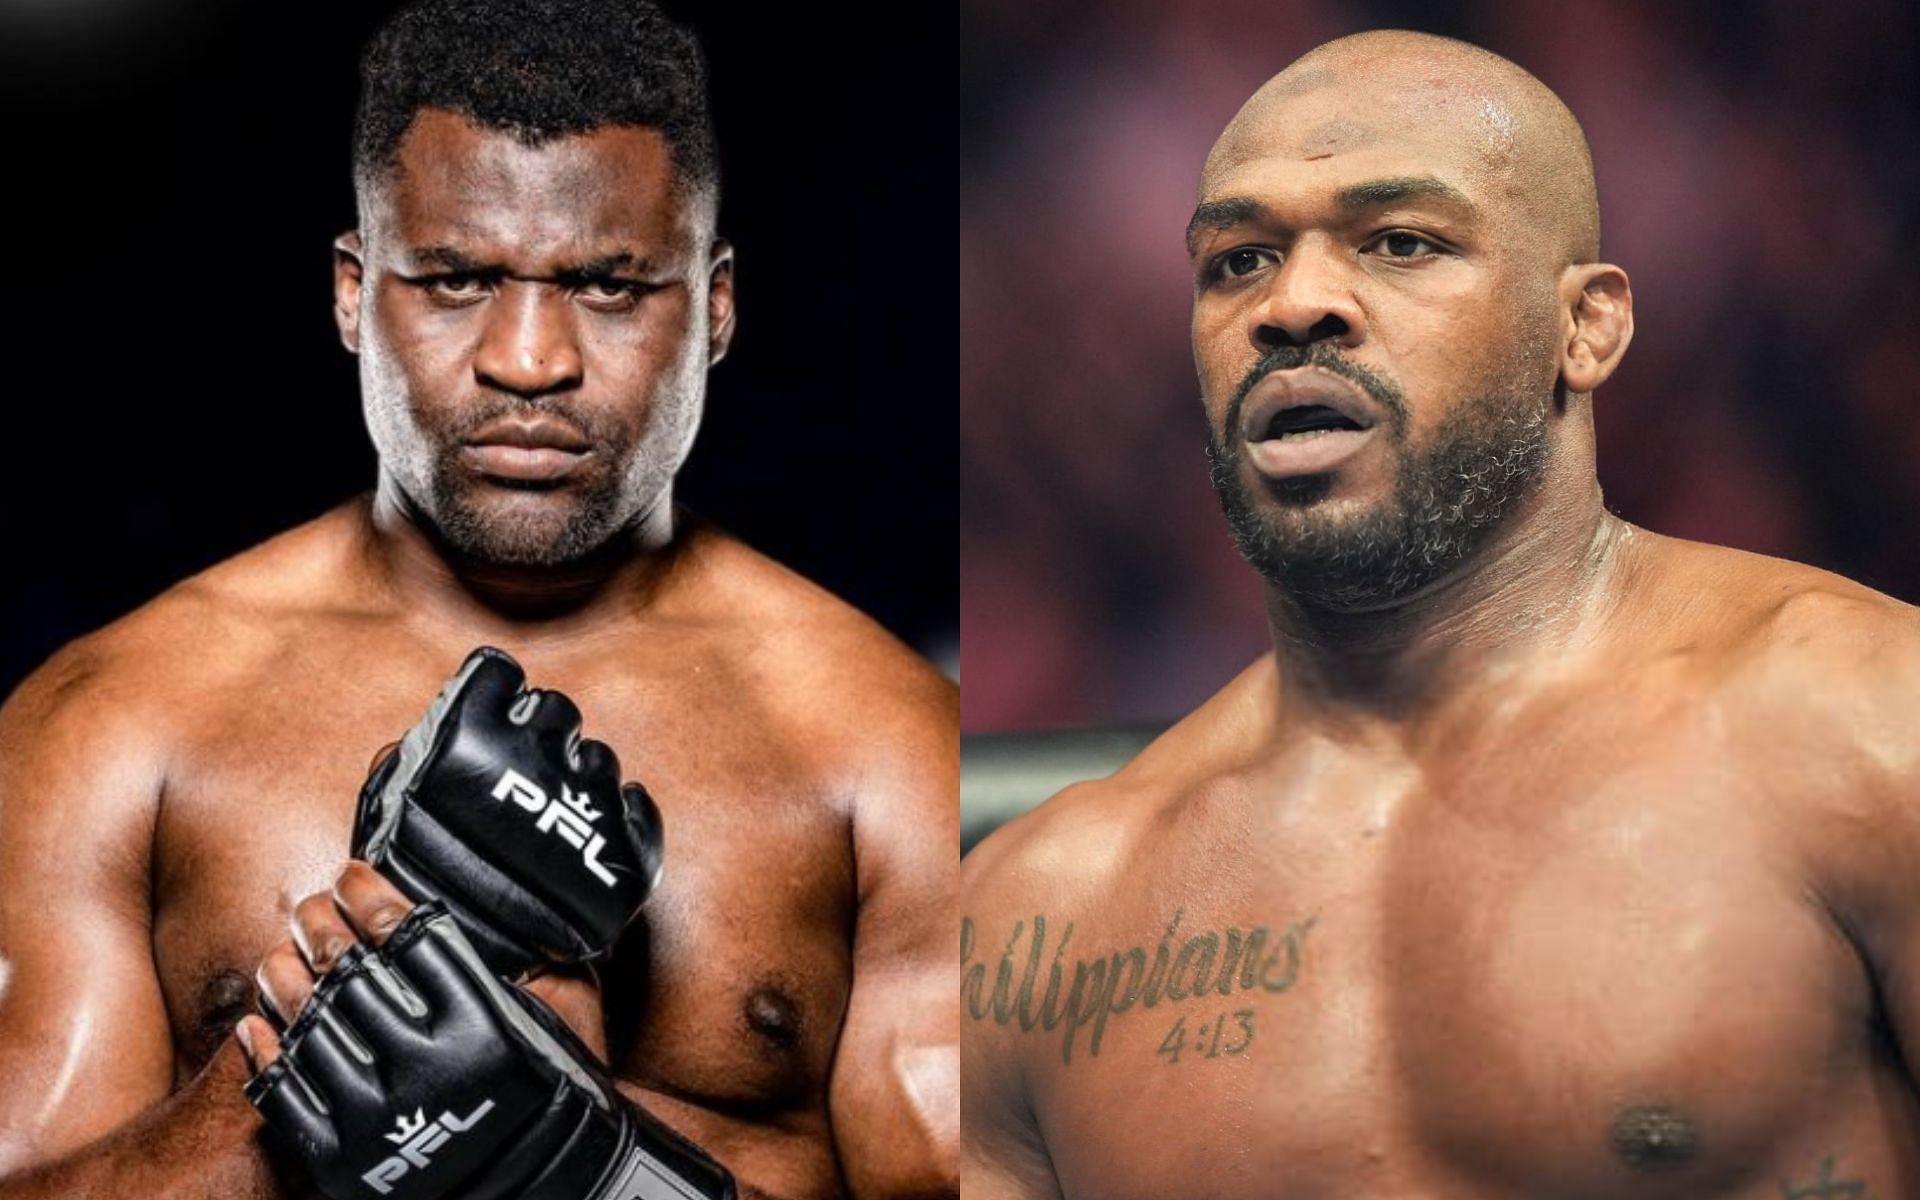 Francis Ngannou (left) and Jon Jones (right) [Images Courtesy: @GettyImages and @francisngannou on Instagram]